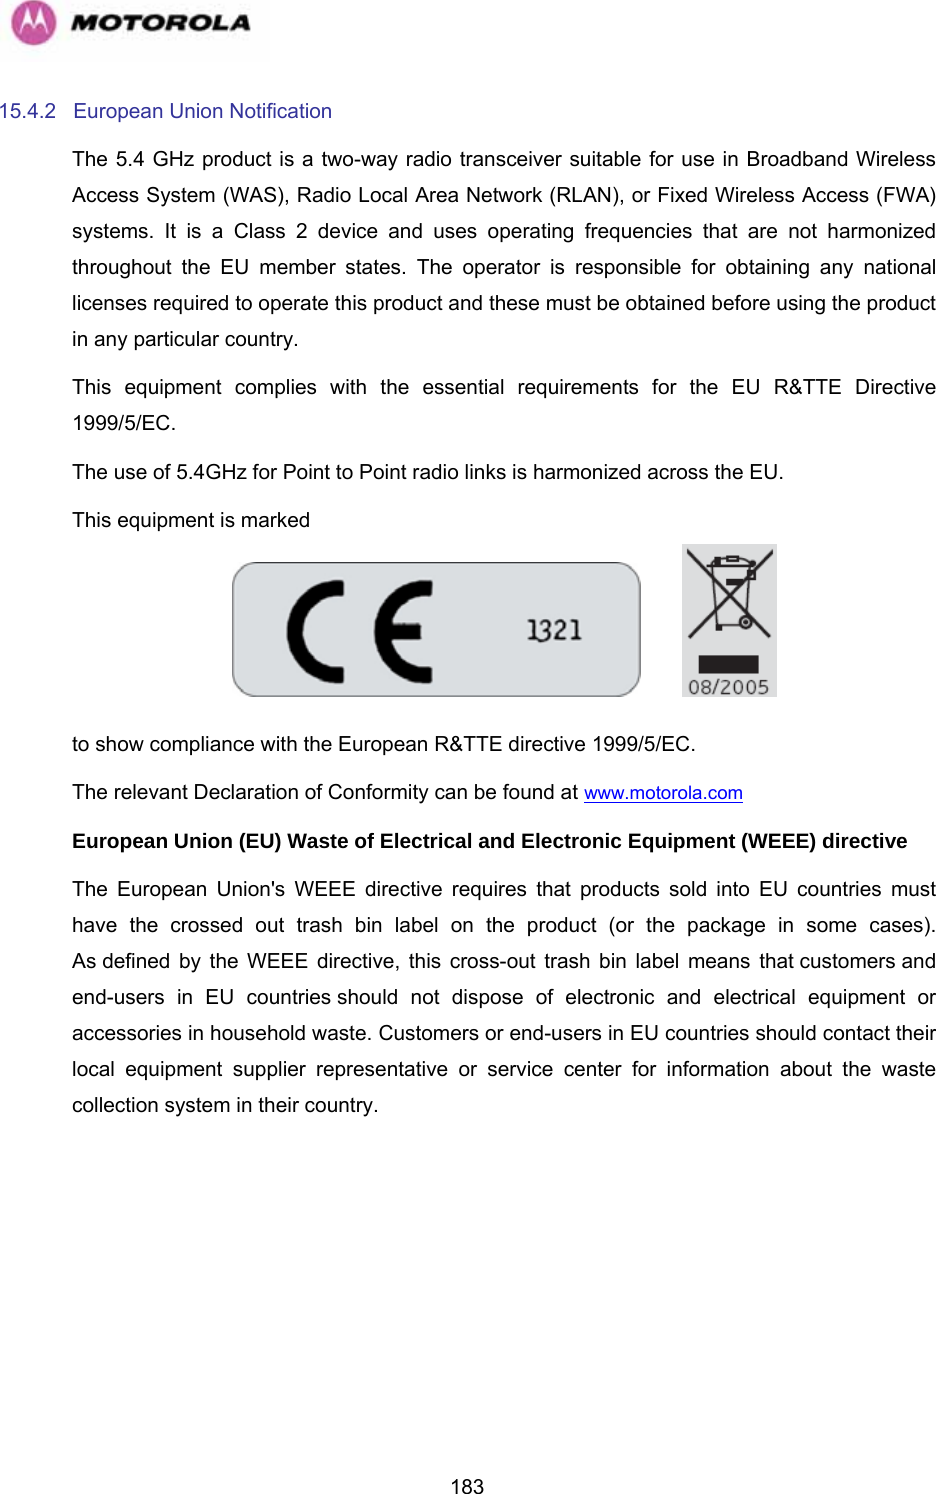   18315.4.2 European Union Notification The 5.4 GHz product is a two-way radio transceiver suitable for use in Broadband Wireless Access System (WAS), Radio Local Area Network (RLAN), or Fixed Wireless Access (FWA) systems. It is a Class 2 device and uses operating frequencies that are not harmonized throughout the EU member states. The operator is responsible for obtaining any national licenses required to operate this product and these must be obtained before using the product in any particular country. This equipment complies with the essential requirements for the EU R&amp;TTE Directive 1999/5/EC. The use of 5.4GHz for Point to Point radio links is harmonized across the EU.  This equipment is marked      to show compliance with the European R&amp;TTE directive 1999/5/EC. The relevant Declaration of Conformity can be found at www.motorola.com  European Union (EU) Waste of Electrical and Electronic Equipment (WEEE) directive  The European Union&apos;s WEEE directive requires that products sold into EU countries must have the crossed out trash bin label on the product (or the package in some cases). As defined by the WEEE directive, this cross-out trash bin label means that customers and end-users in EU countries should not dispose of electronic and electrical equipment or accessories in household waste. Customers or end-users in EU countries should contact their local equipment supplier representative or service center for information about the waste collection system in their country. 